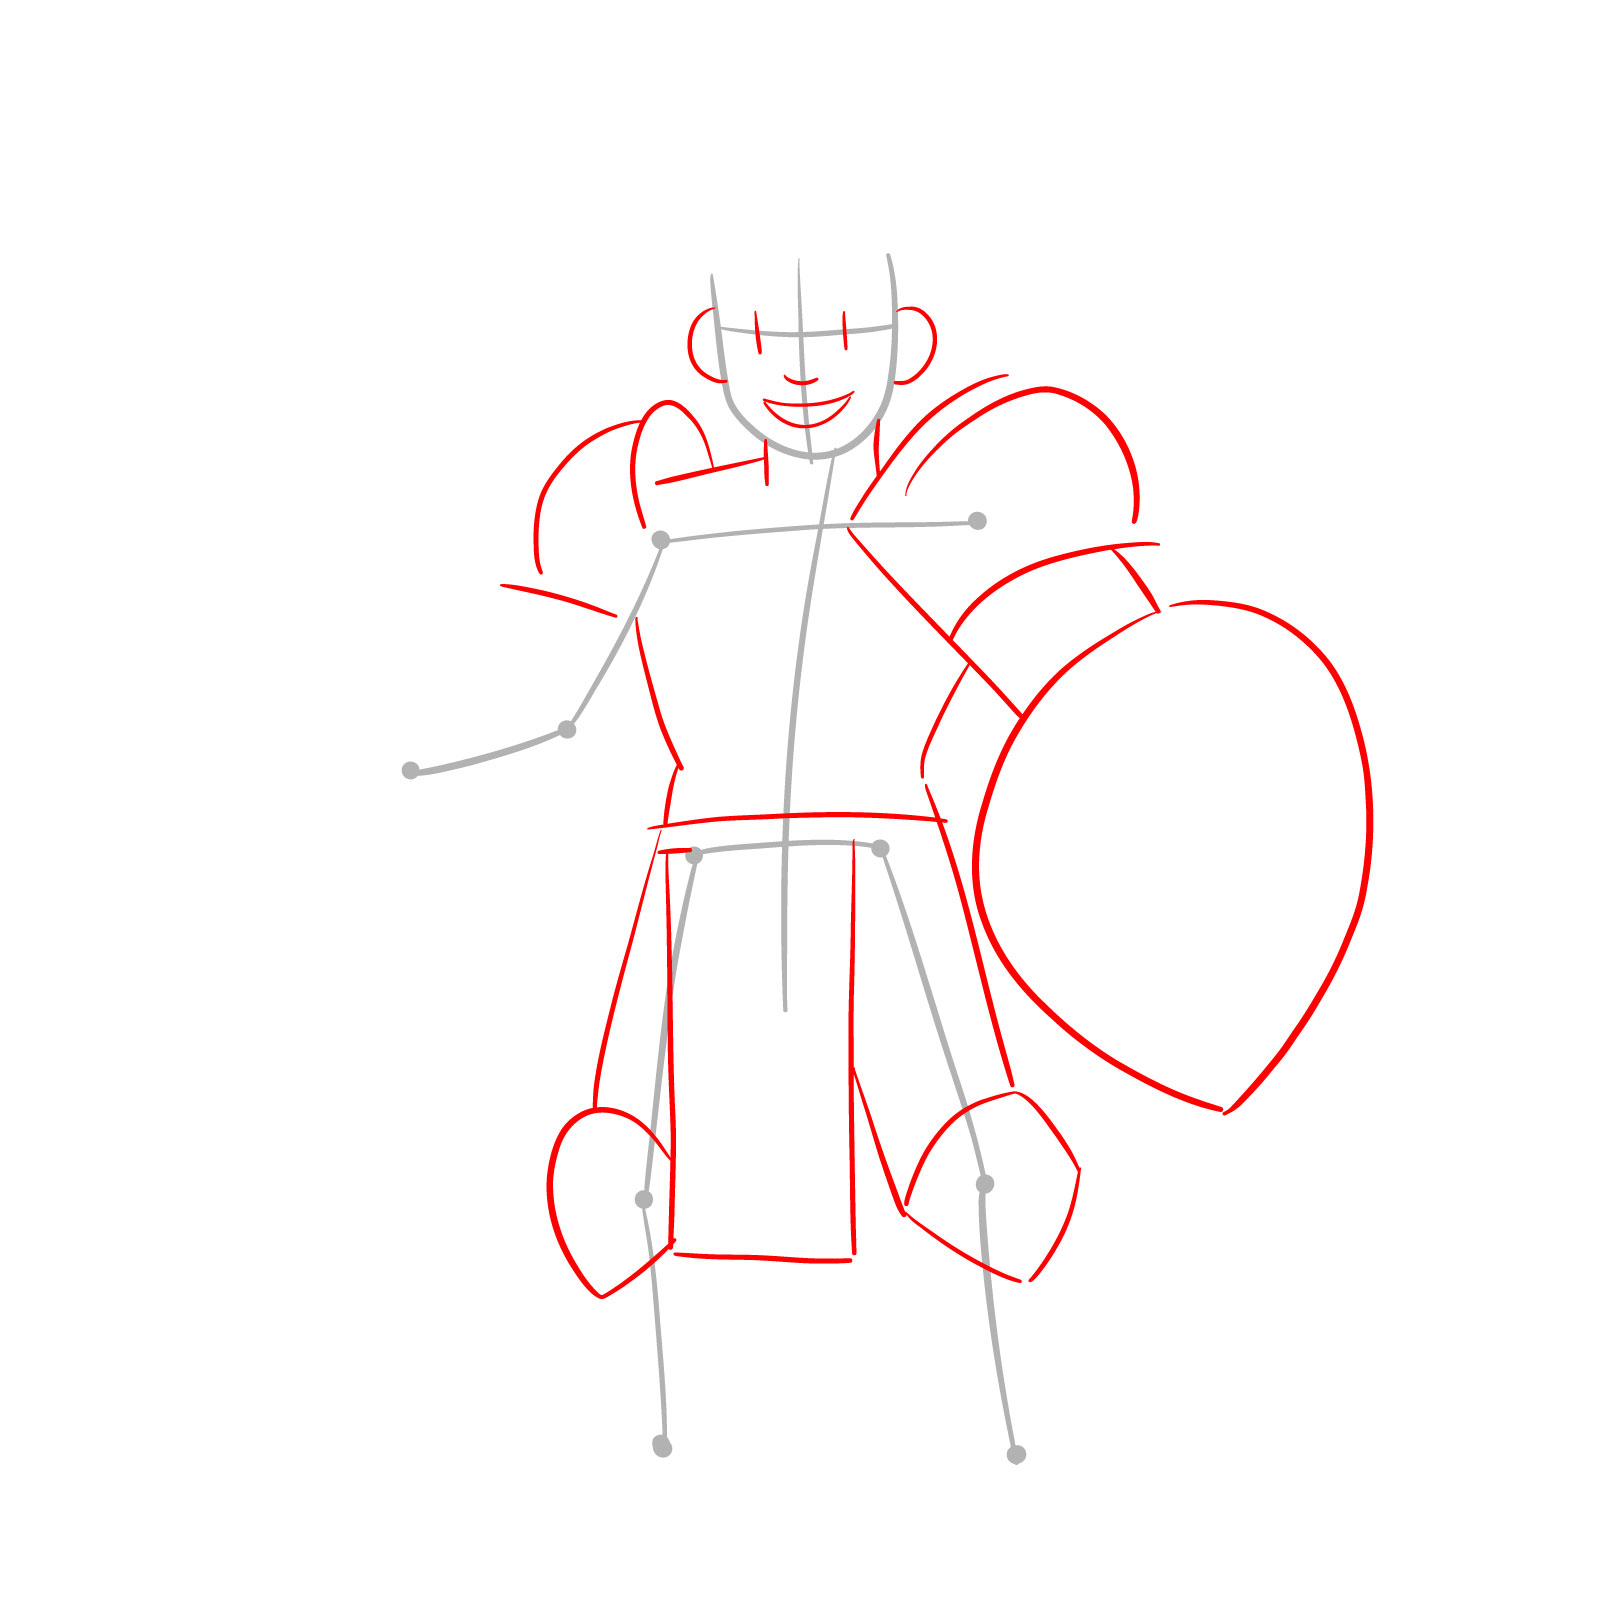 Easy paladin drawing step 2: detailing facial features and body armor